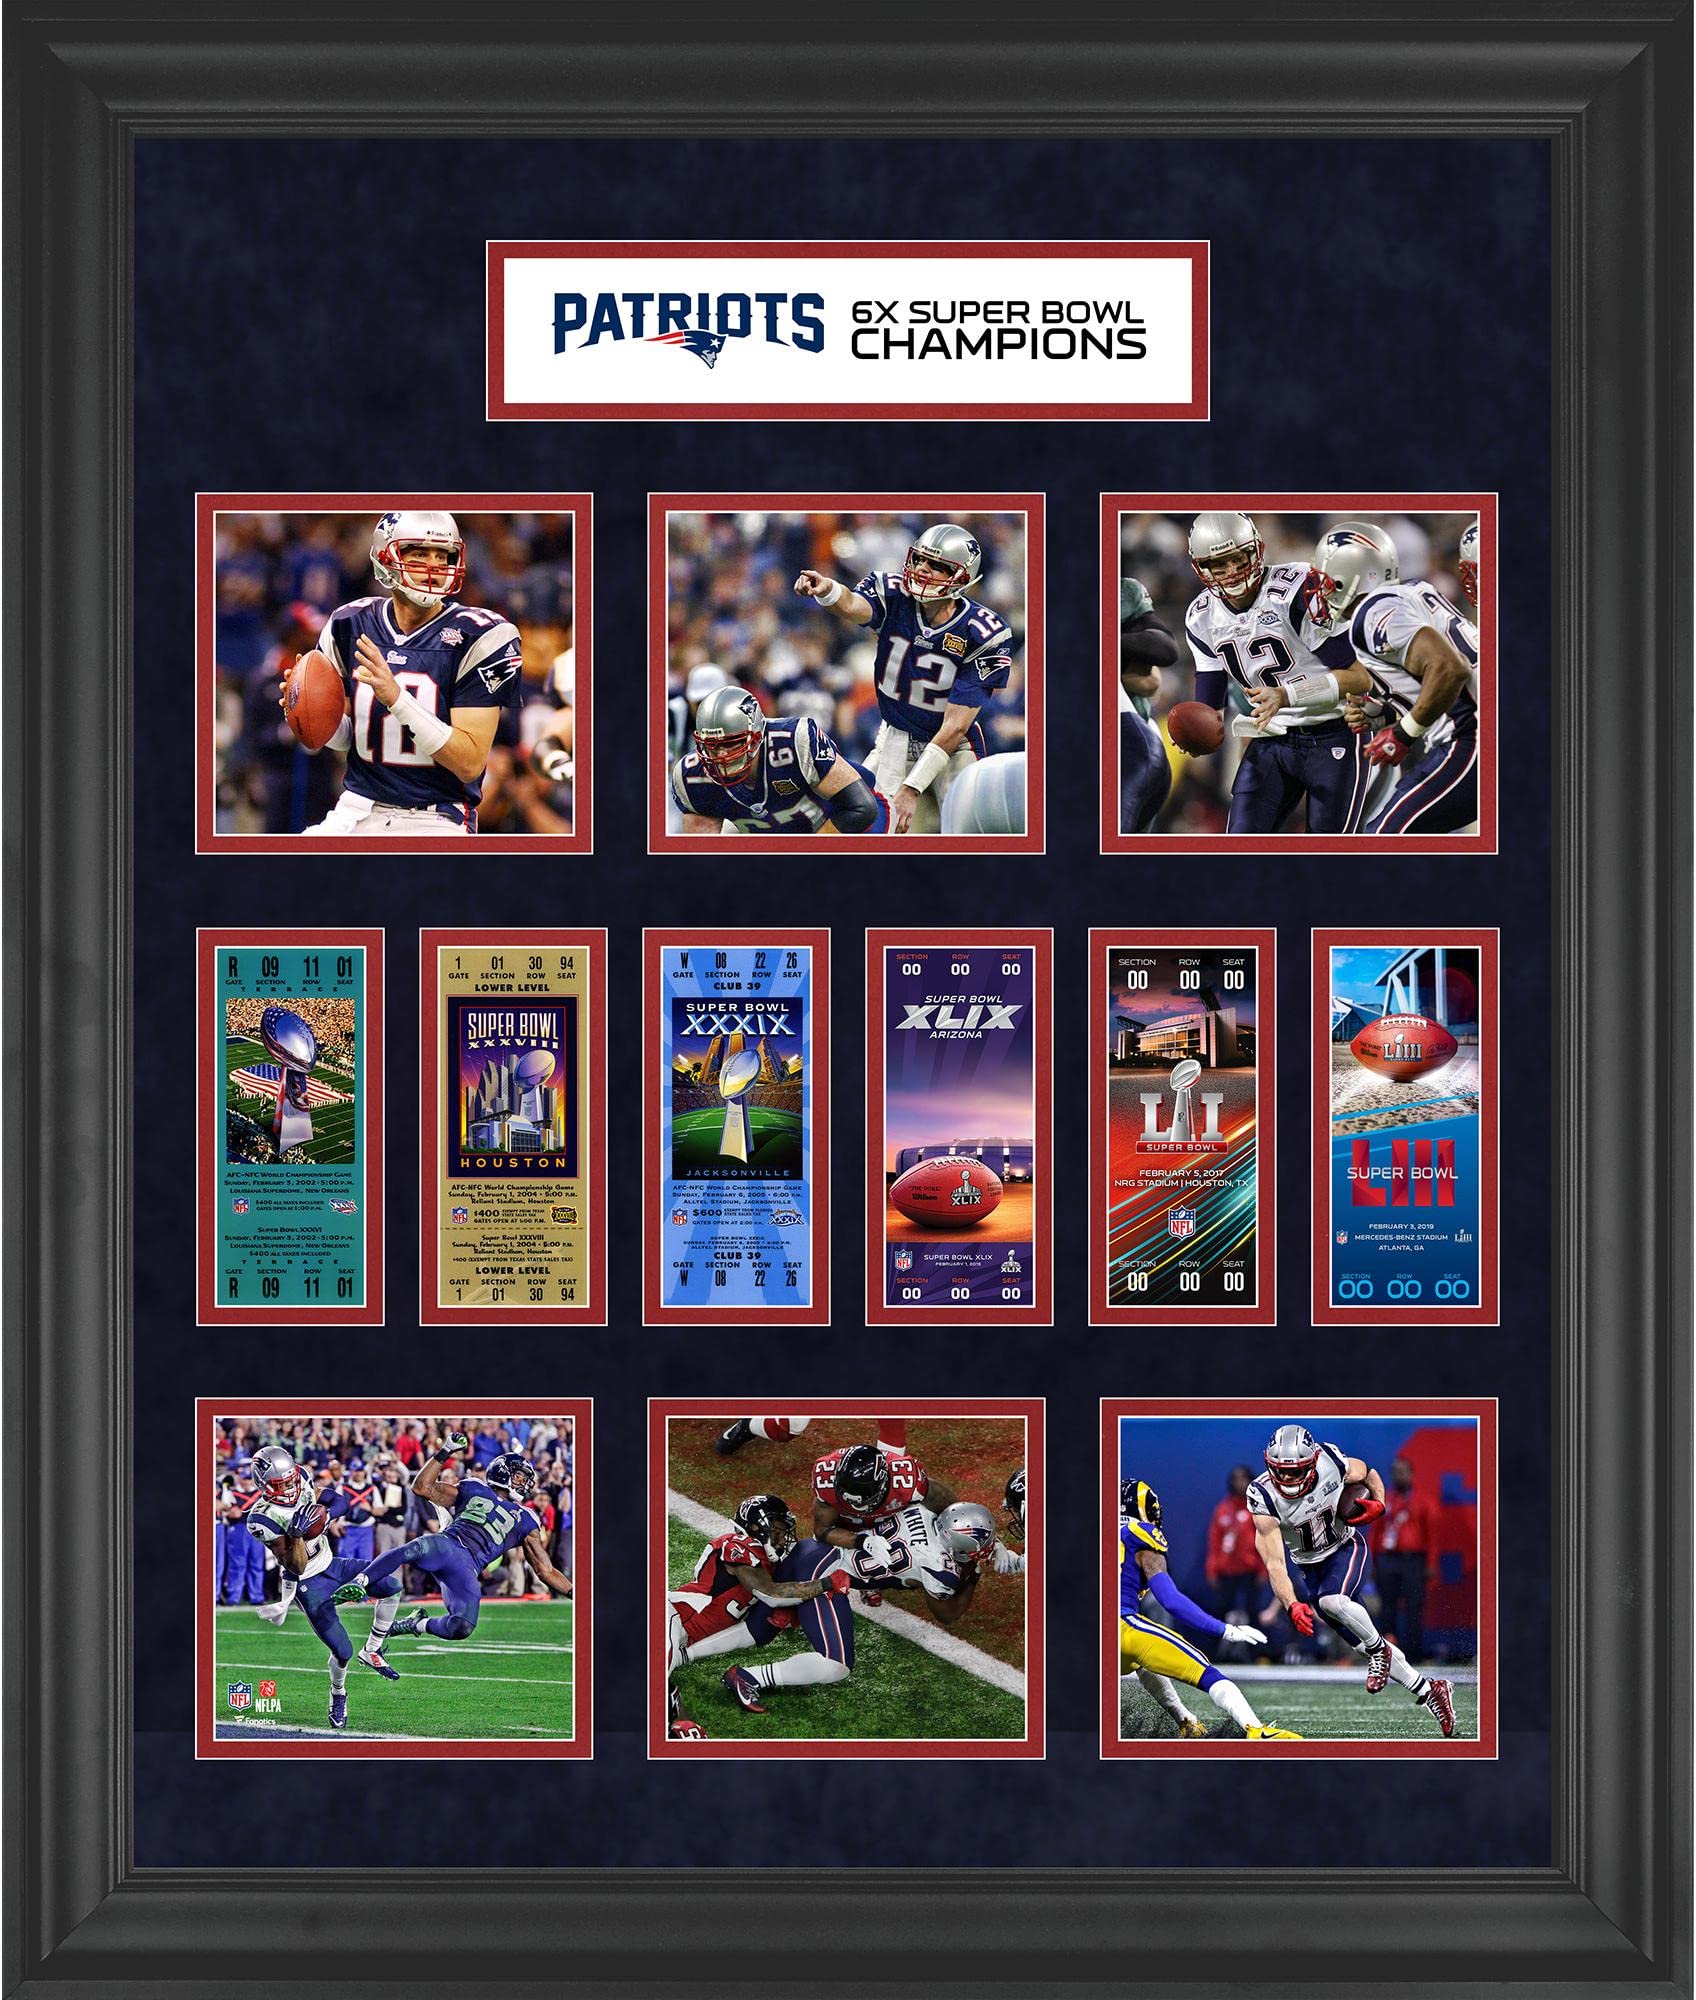 Sports Memorabilia New England Patriots Framed 23" x 27" 6-Time Super Bowl Champion Ticket Collage - NFL Team Plaques and Collages